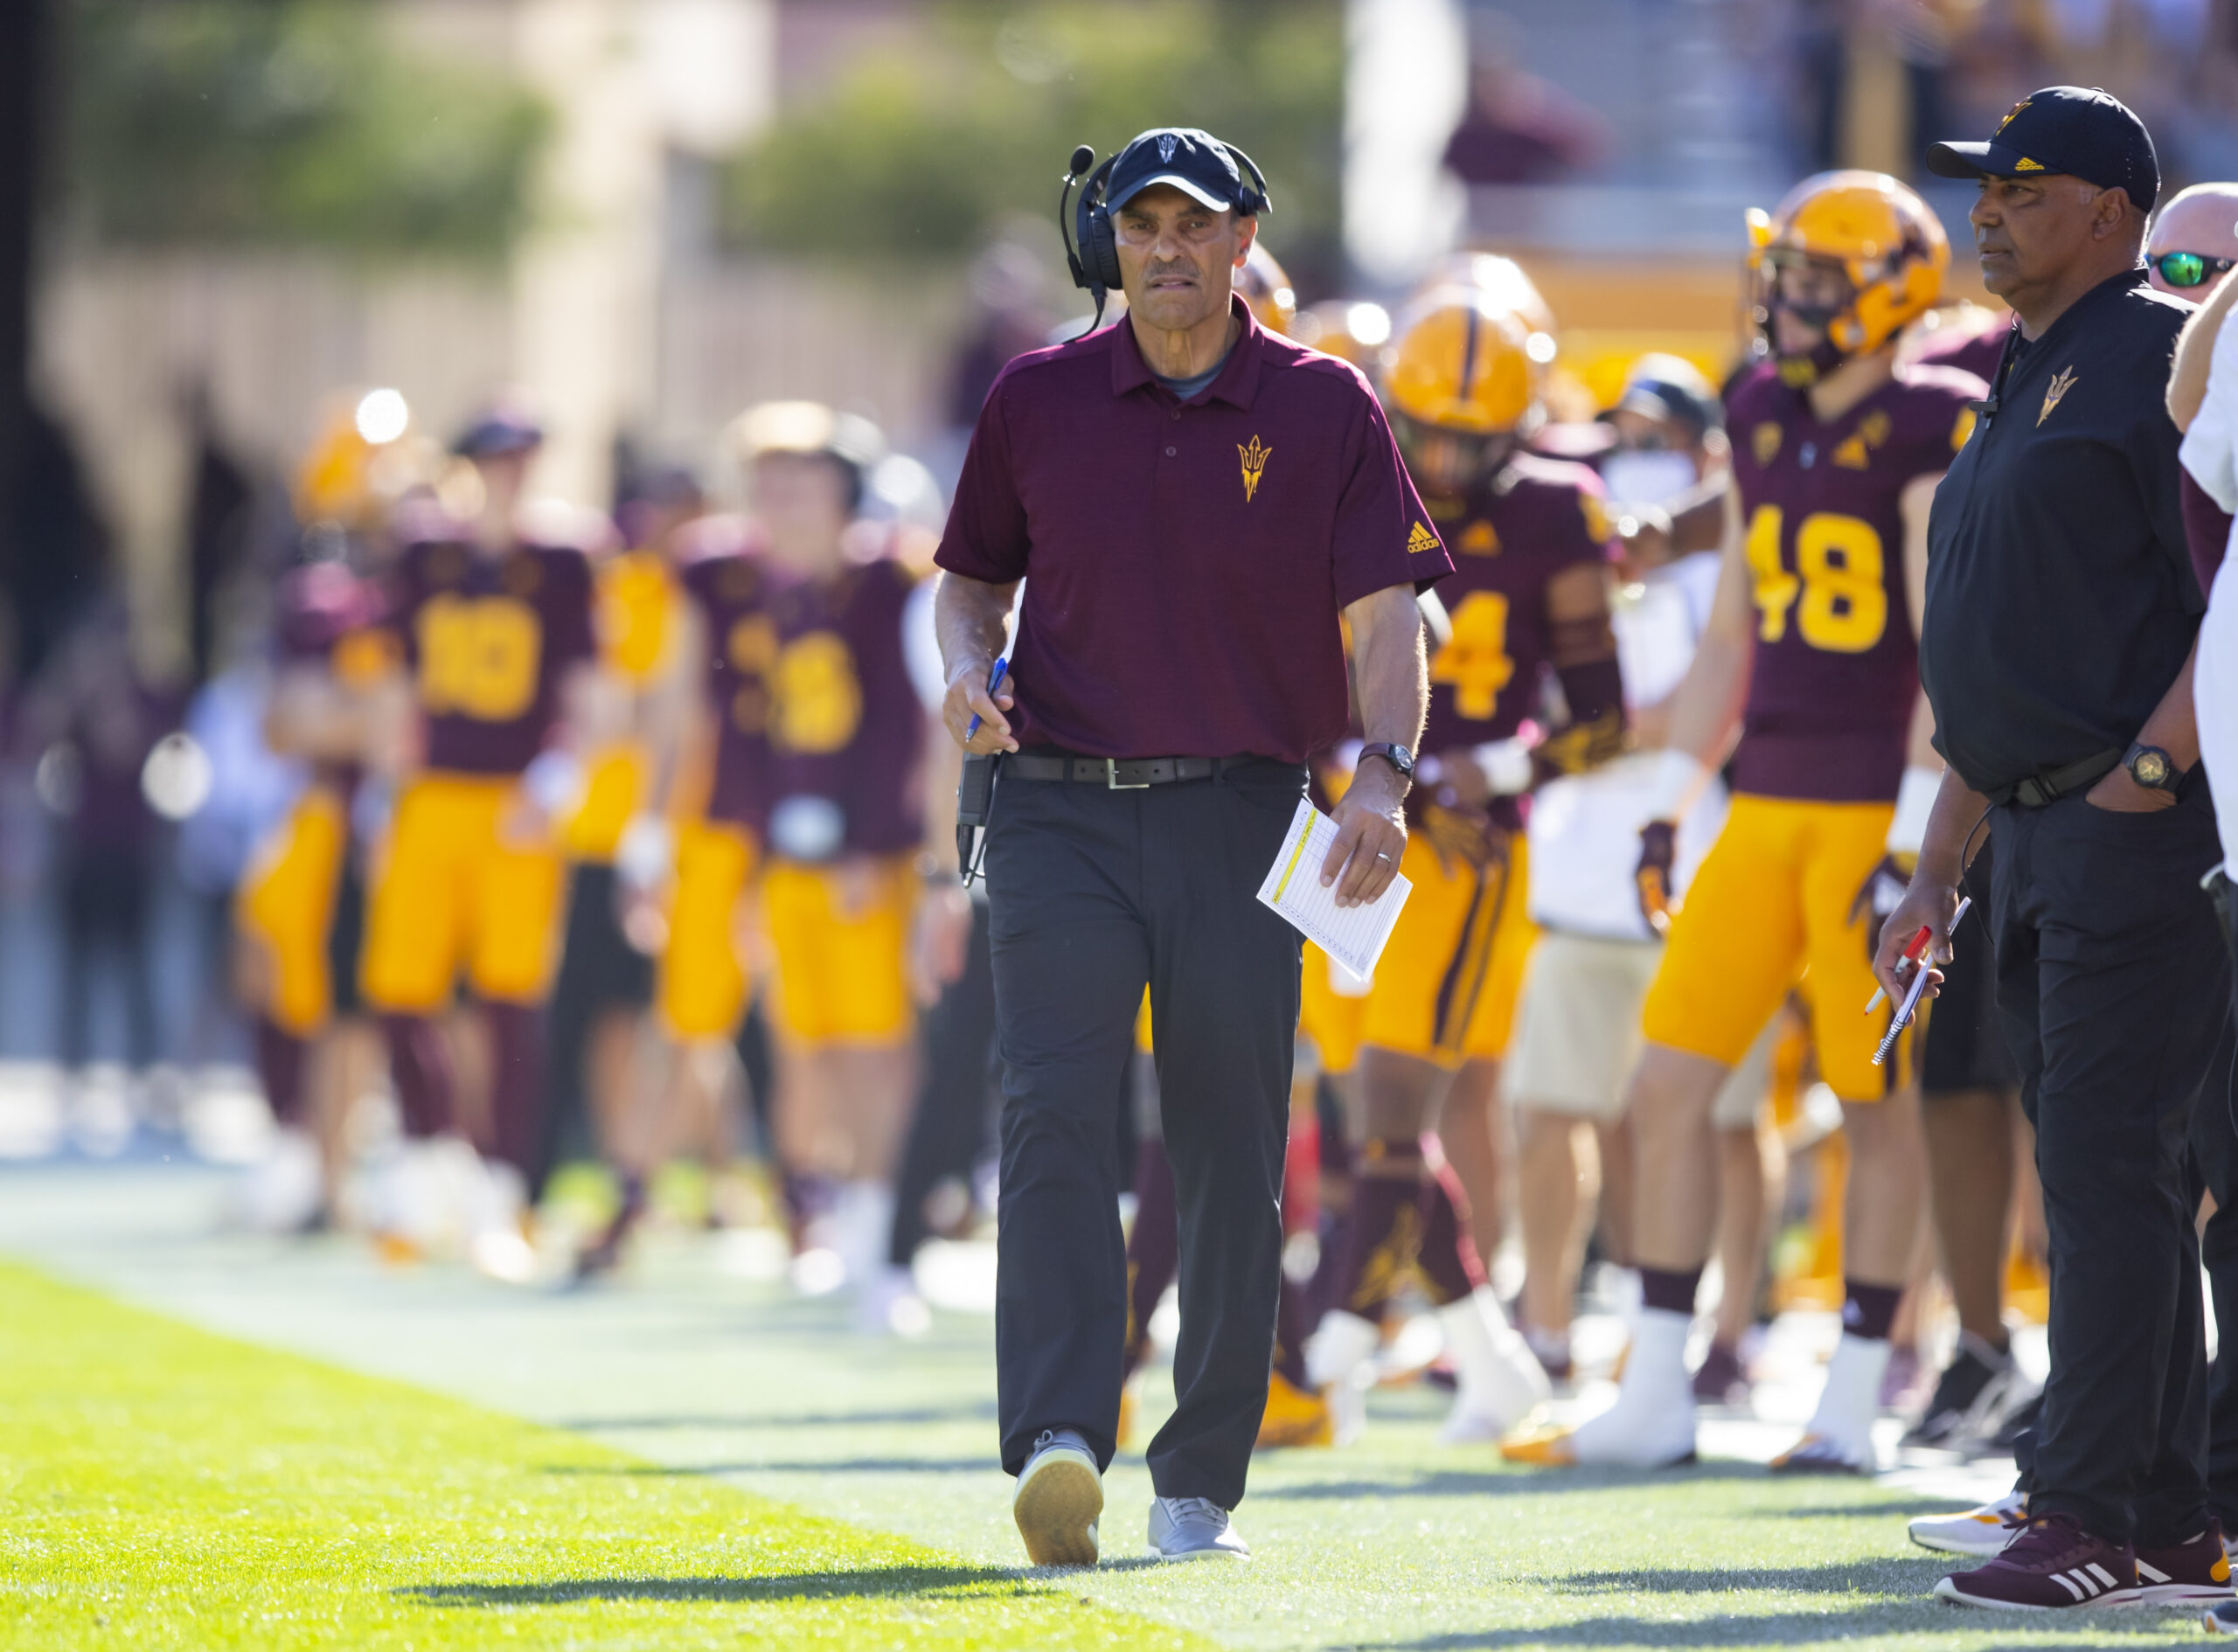 ASU football kicked off its first day of spring practices